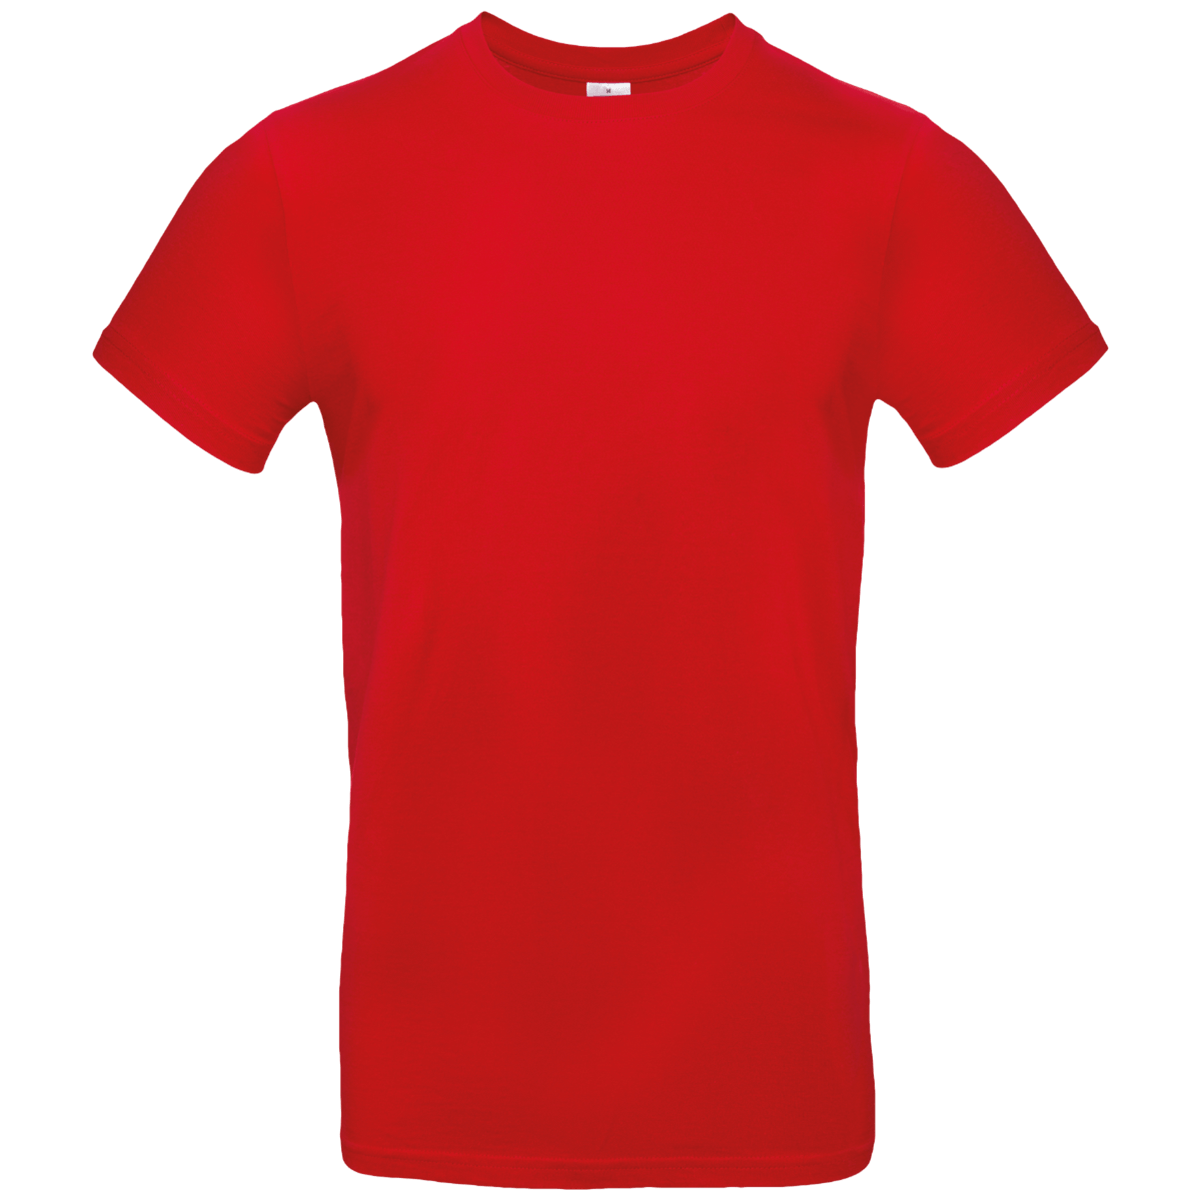 T-Shirt B&c 190 Personnalisable Sur Tunetoo Red